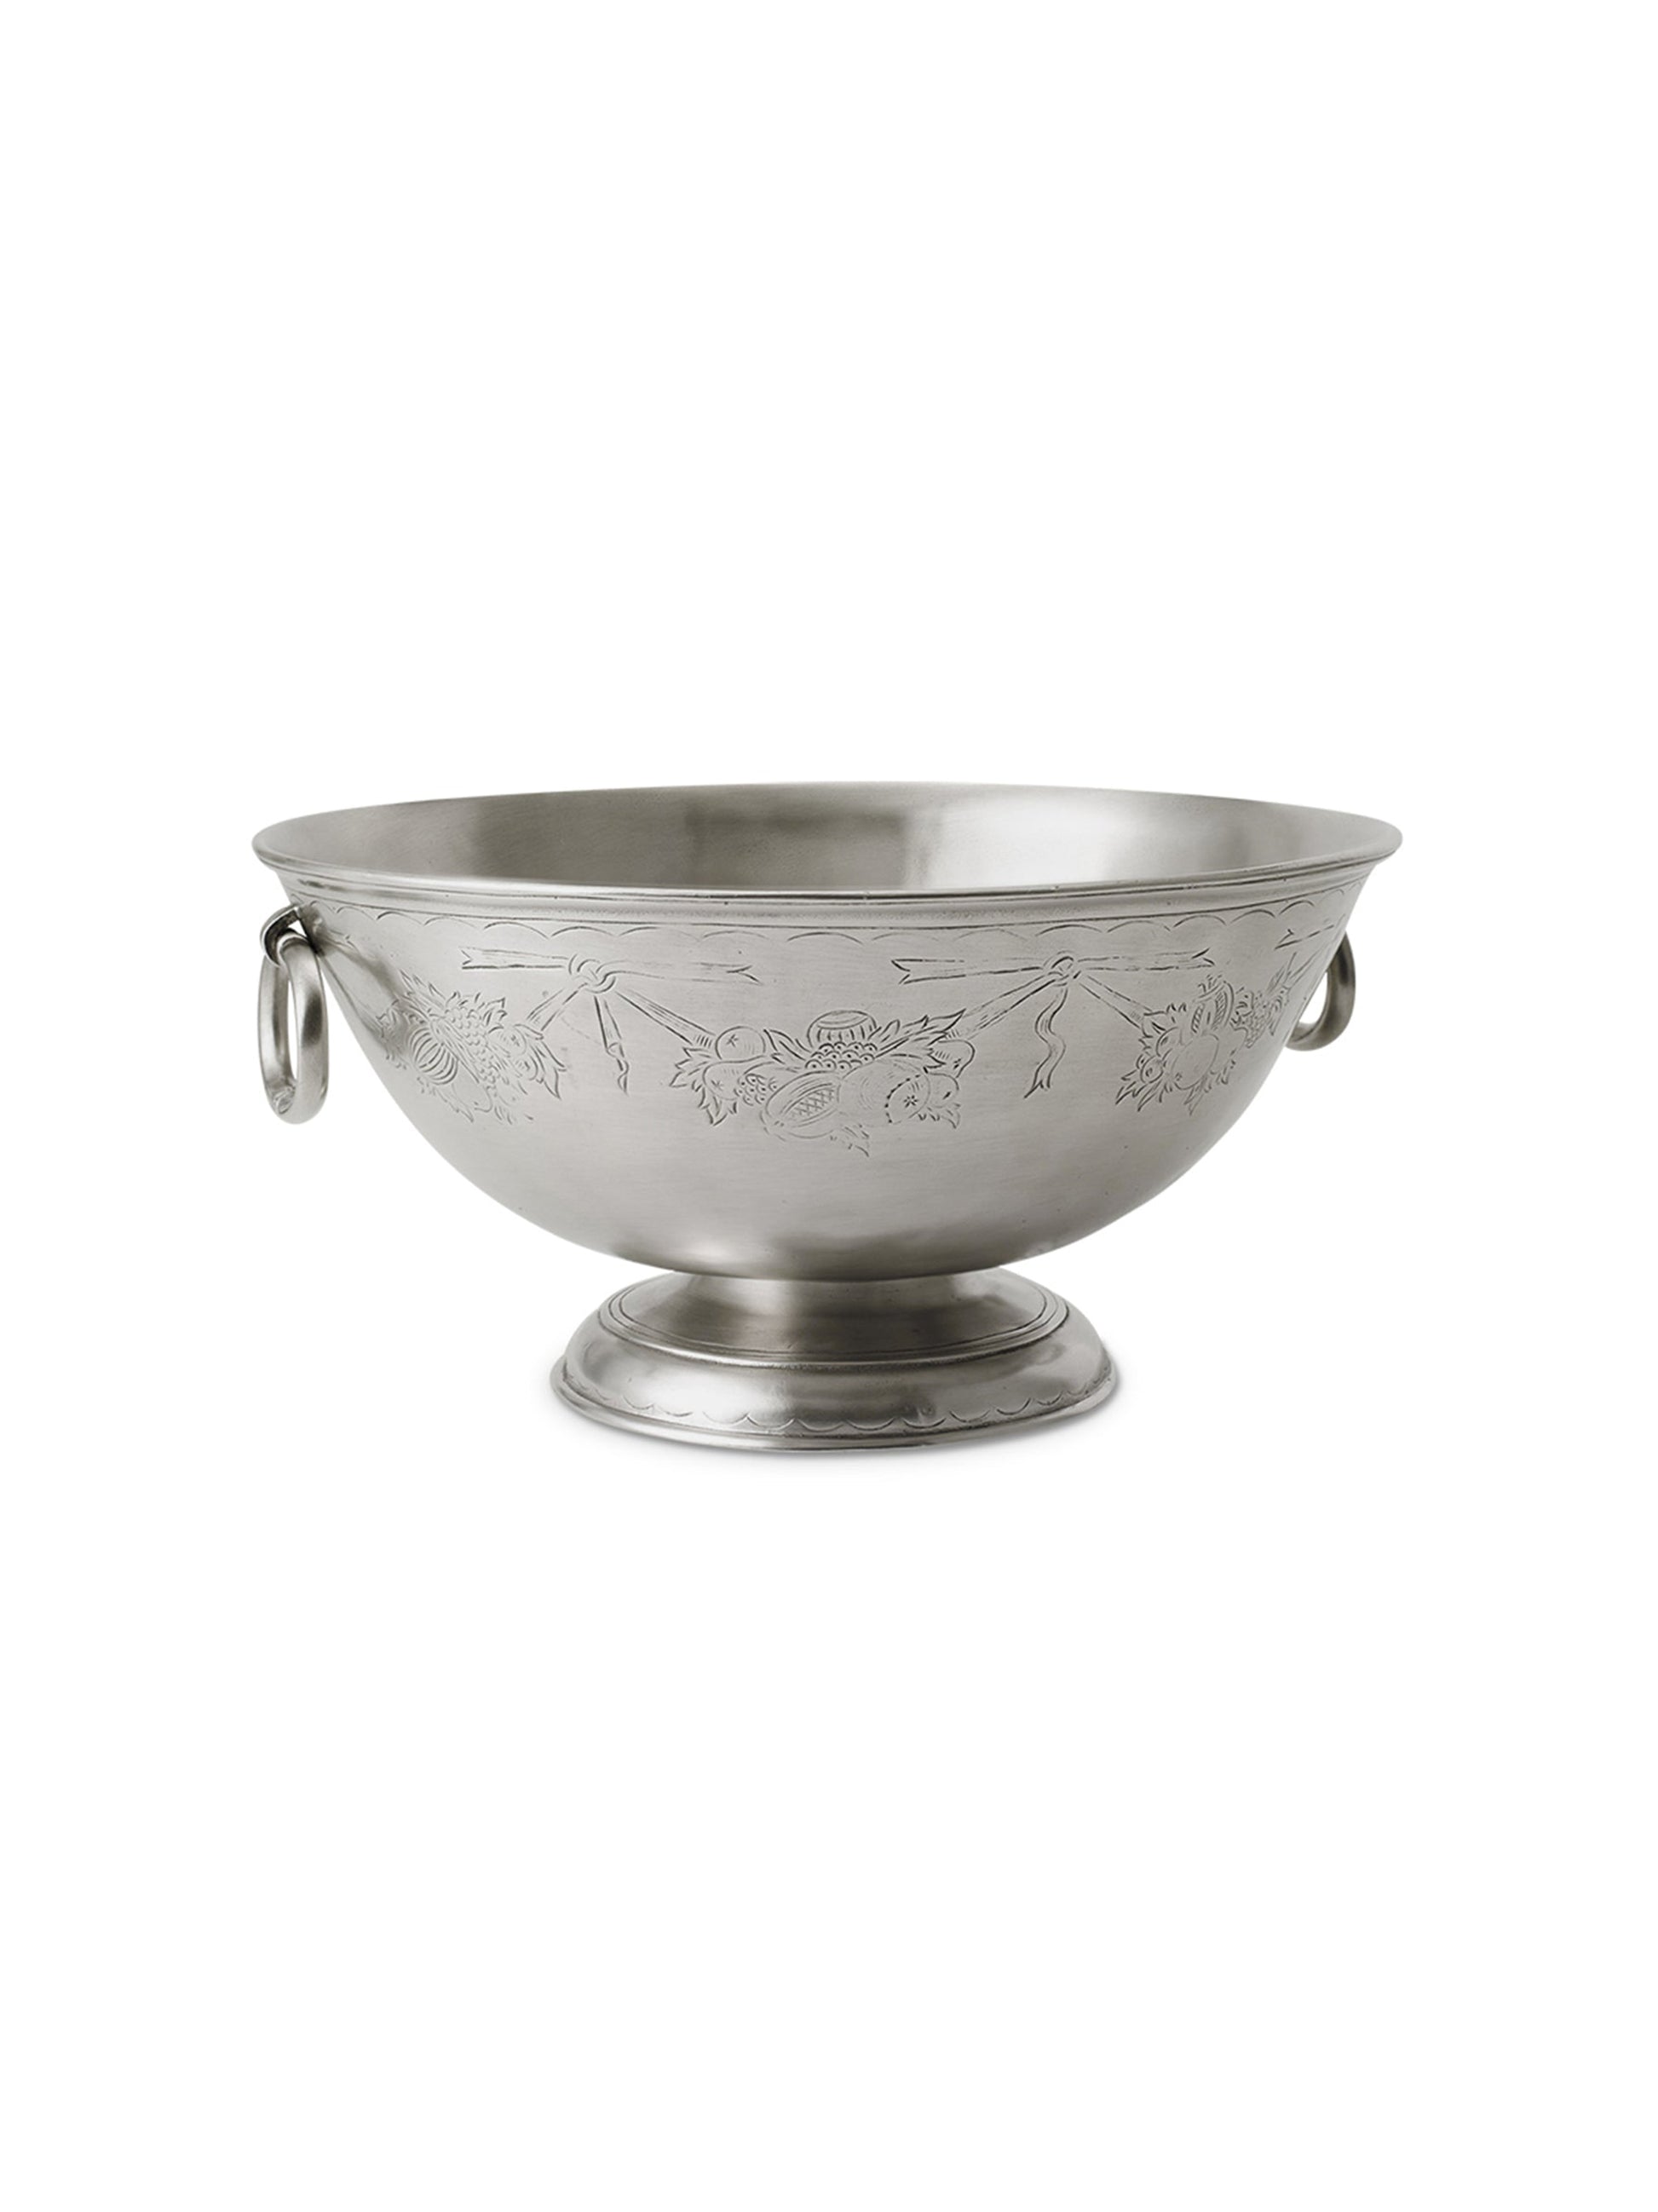 MATCH Pewter Engraved Deep Footed Bowl Weston Table